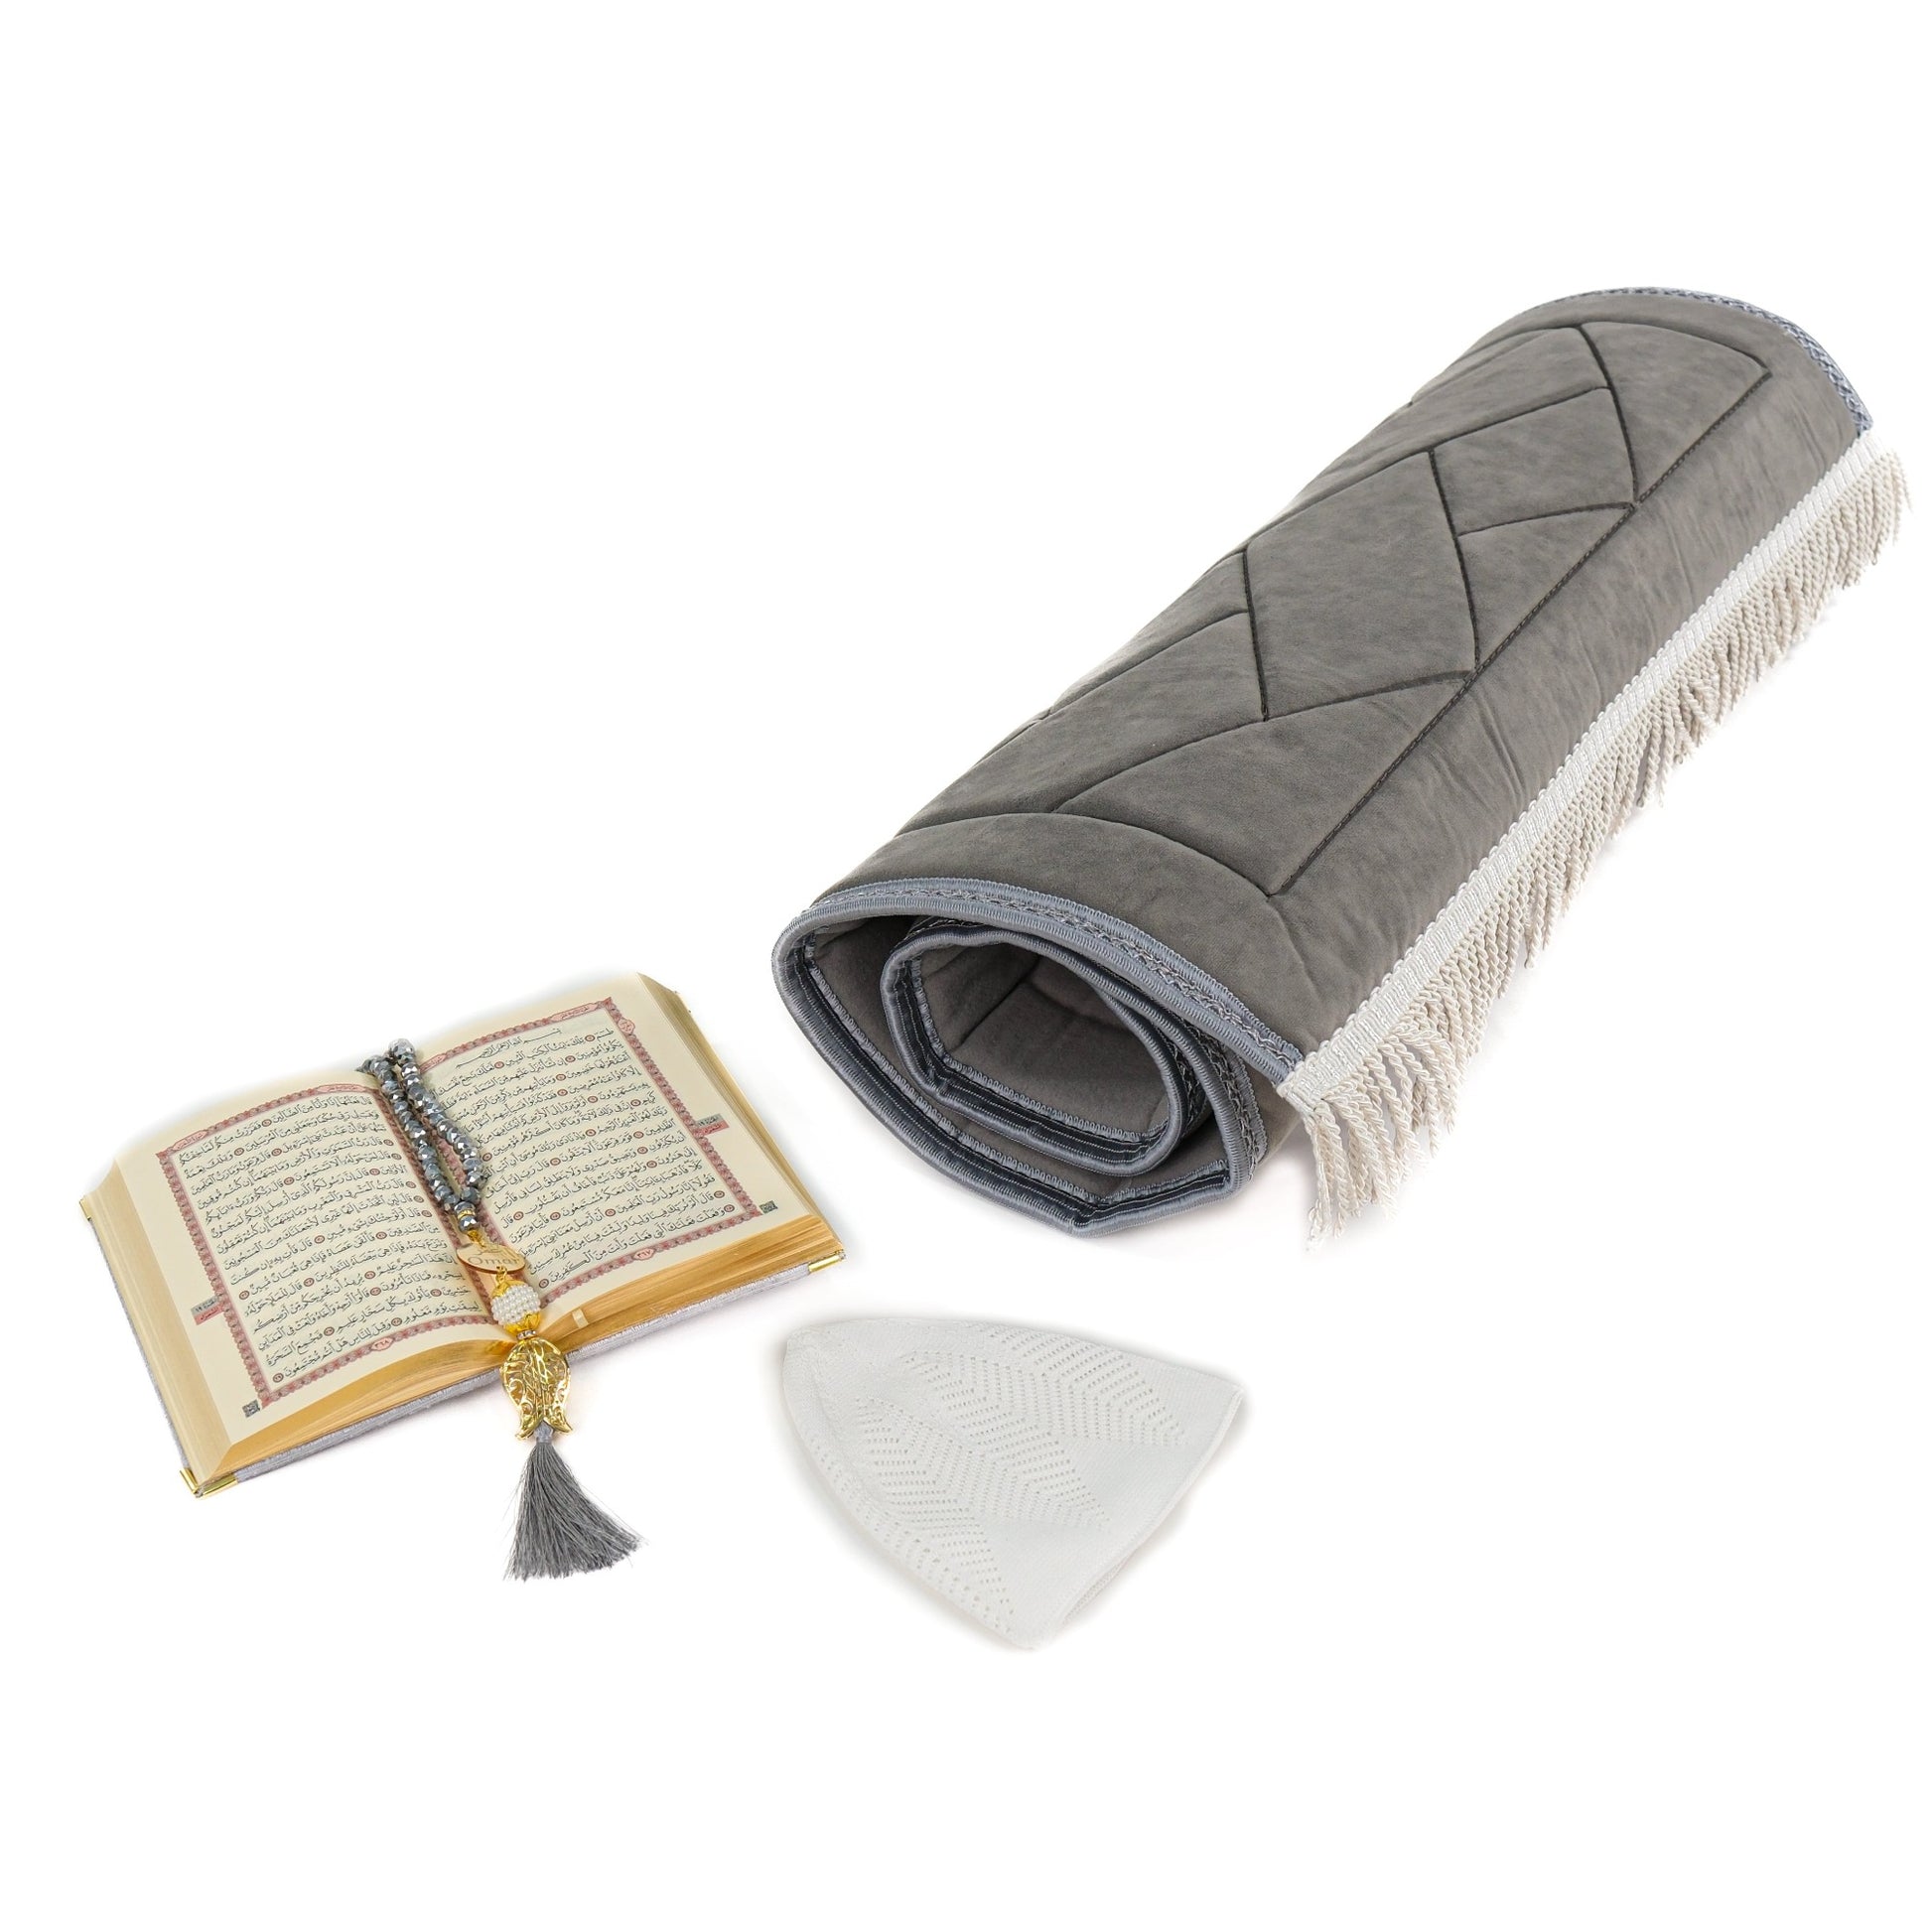 Padded Thick Prayer Mat Quran Tasbeeh Kufi Islamic Muslim Gift Set - Islamic Elite Favors is a handmade gift shop offering a wide variety of unique and personalized gifts for all occasions. Whether you're looking for the perfect Ramadan, Eid, Hajj, wedding gift or something special for a birthday, baby shower or anniversary, we have something for everyone. High quality, made with love.